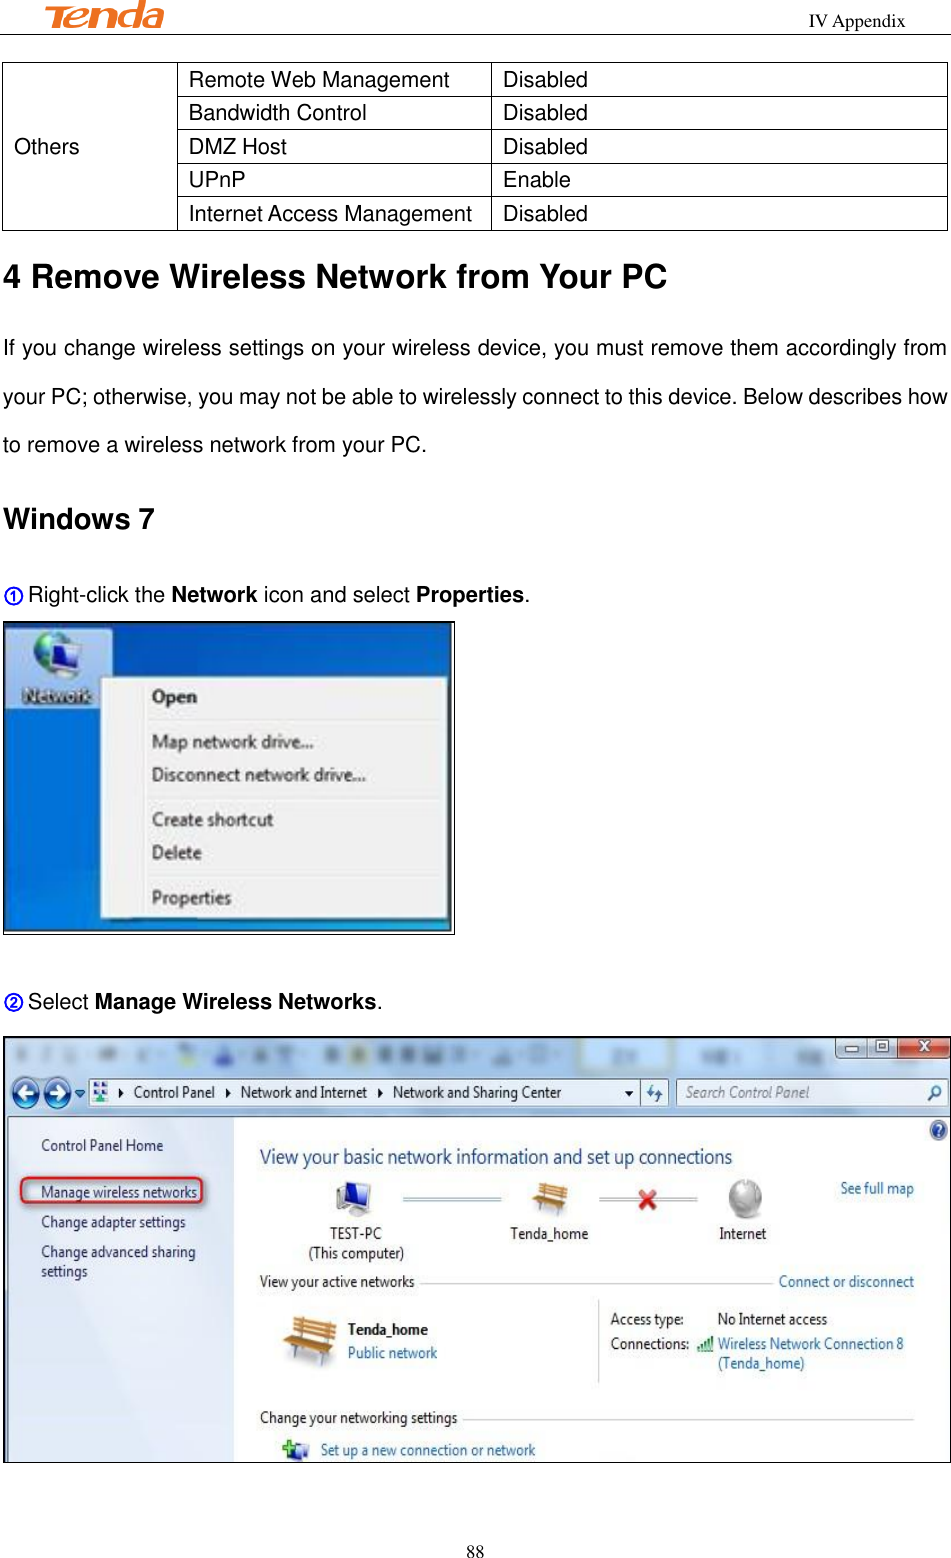                                                            IV Appendix         88 Others Remote Web Management Disabled Bandwidth Control Disabled DMZ Host Disabled UPnP Enable Internet Access Management Disabled 4 Remove Wireless Network from Your PC If you change wireless settings on your wireless device, you must remove them accordingly from your PC; otherwise, you may not be able to wirelessly connect to this device. Below describes how to remove a wireless network from your PC. Windows 7 ① Right-click the Network icon and select Properties.   ② Select Manage Wireless Networks.  